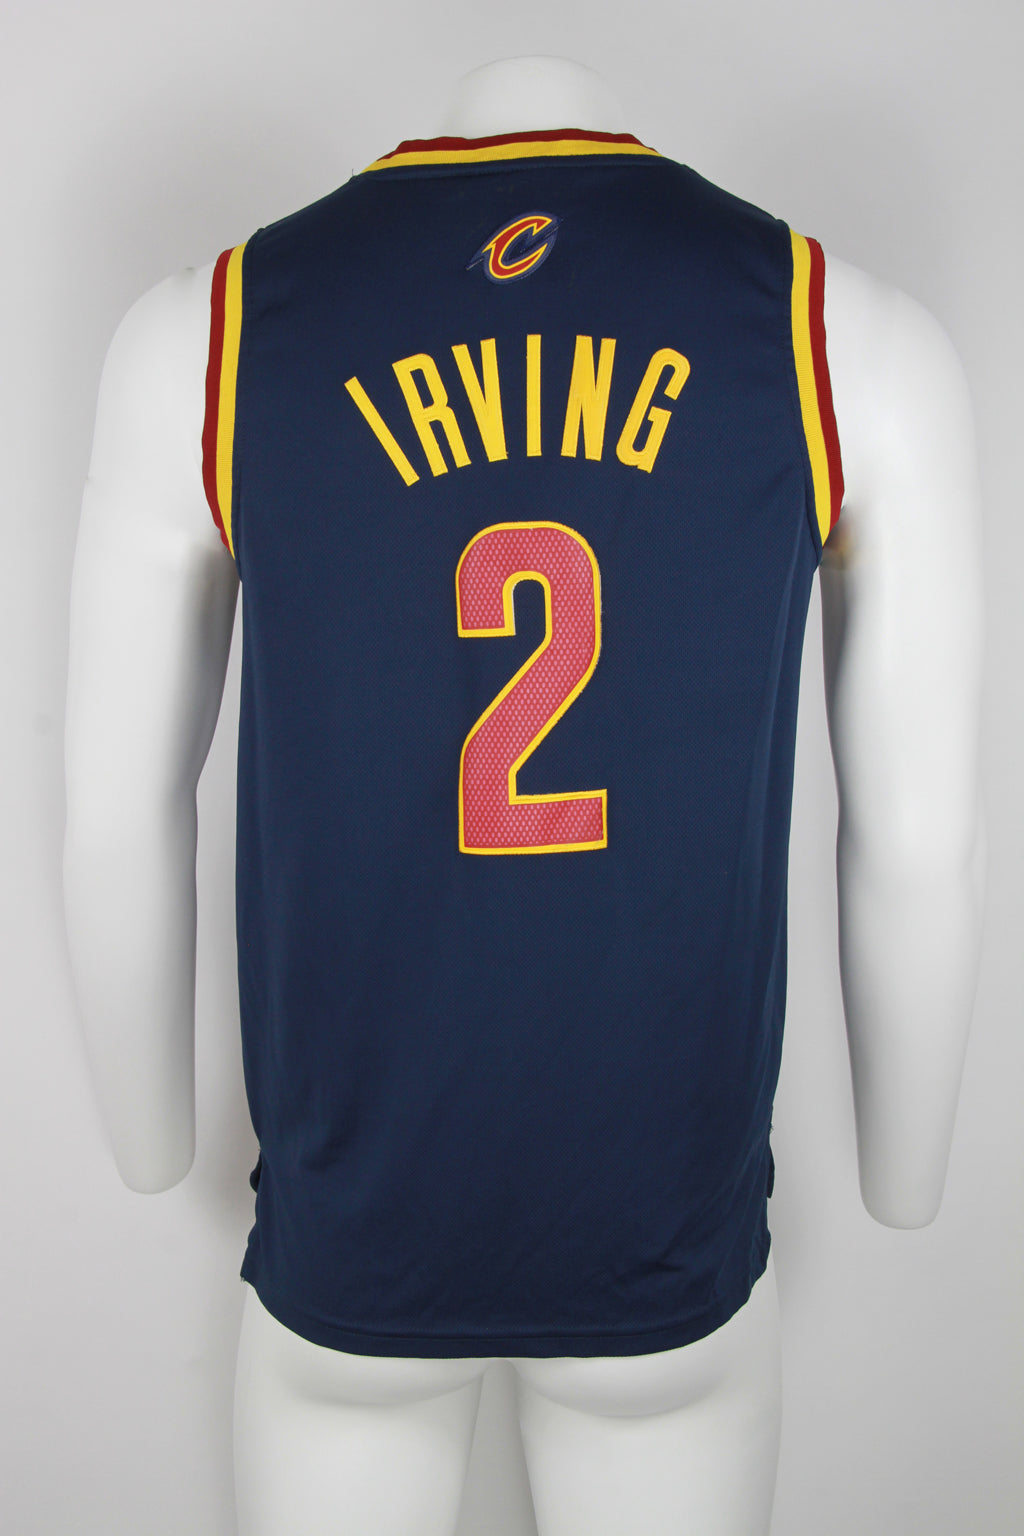 Cleveland Cavaliers Throwback Apparel & Jerseys